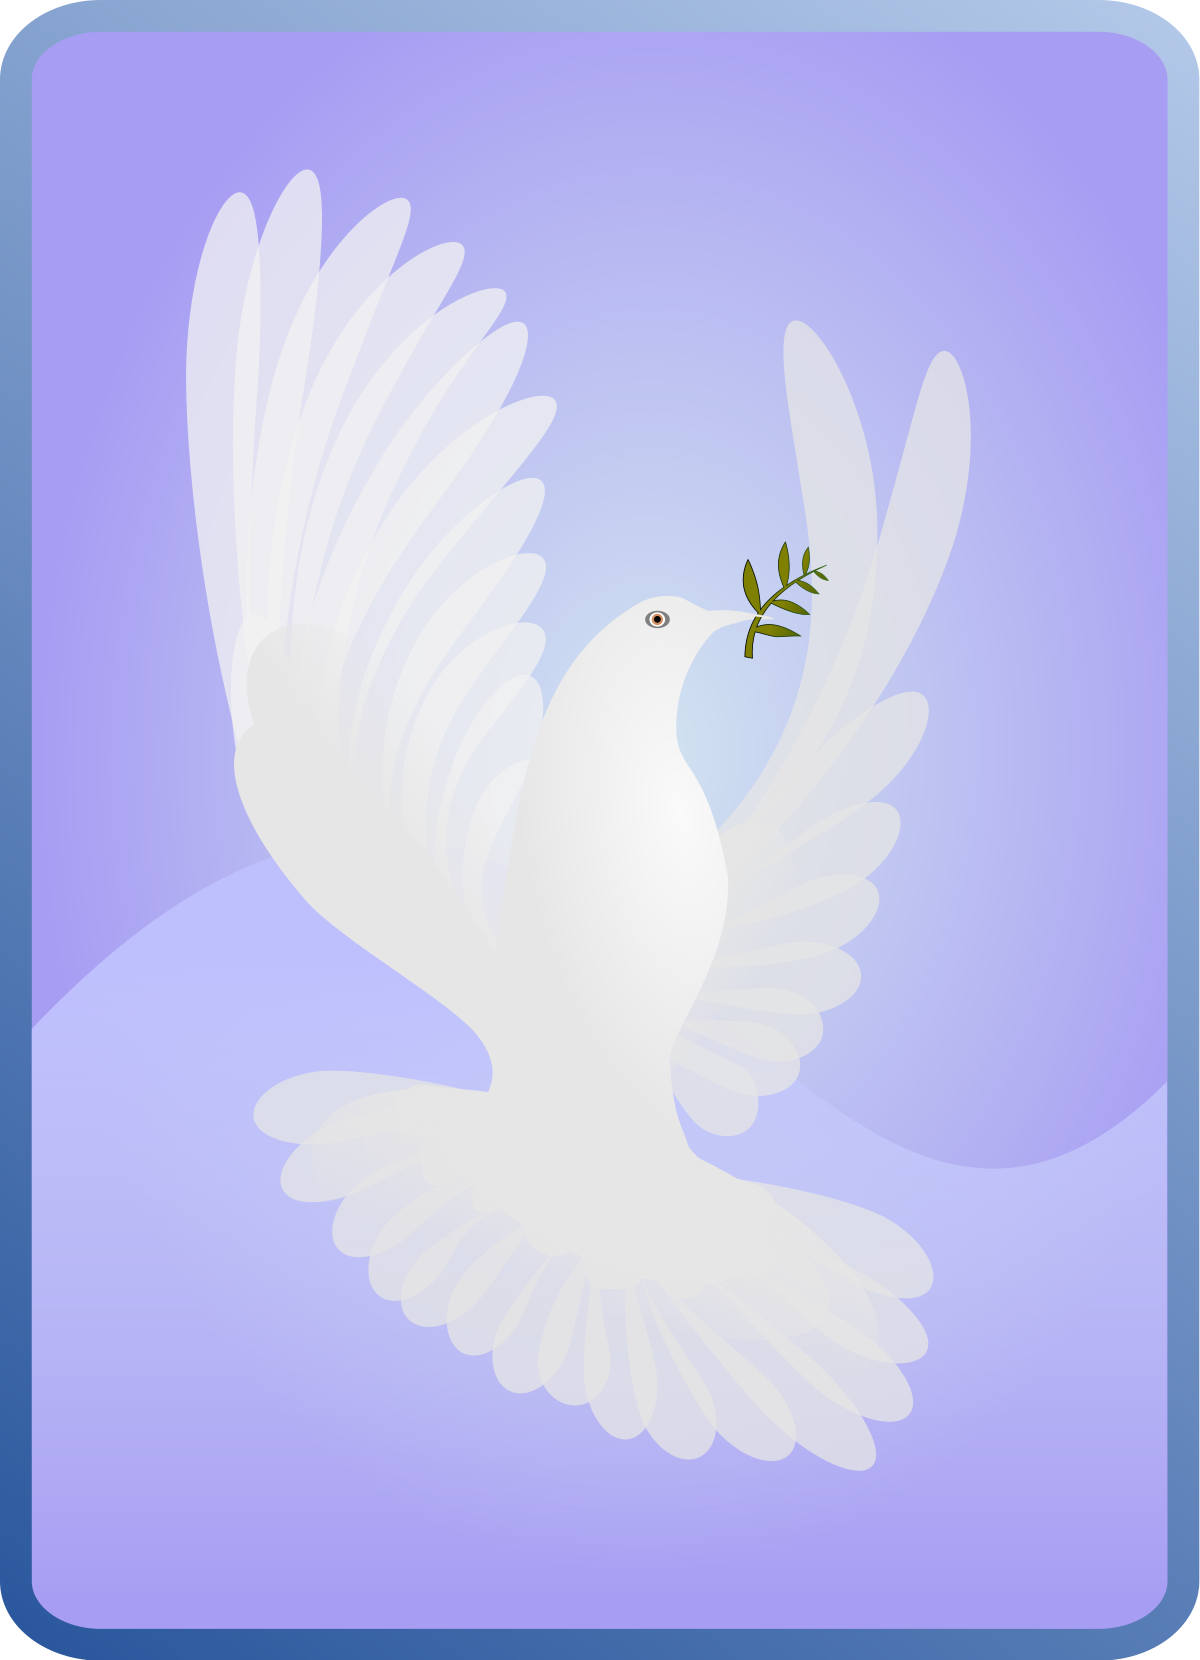 Dove carrying olive branch